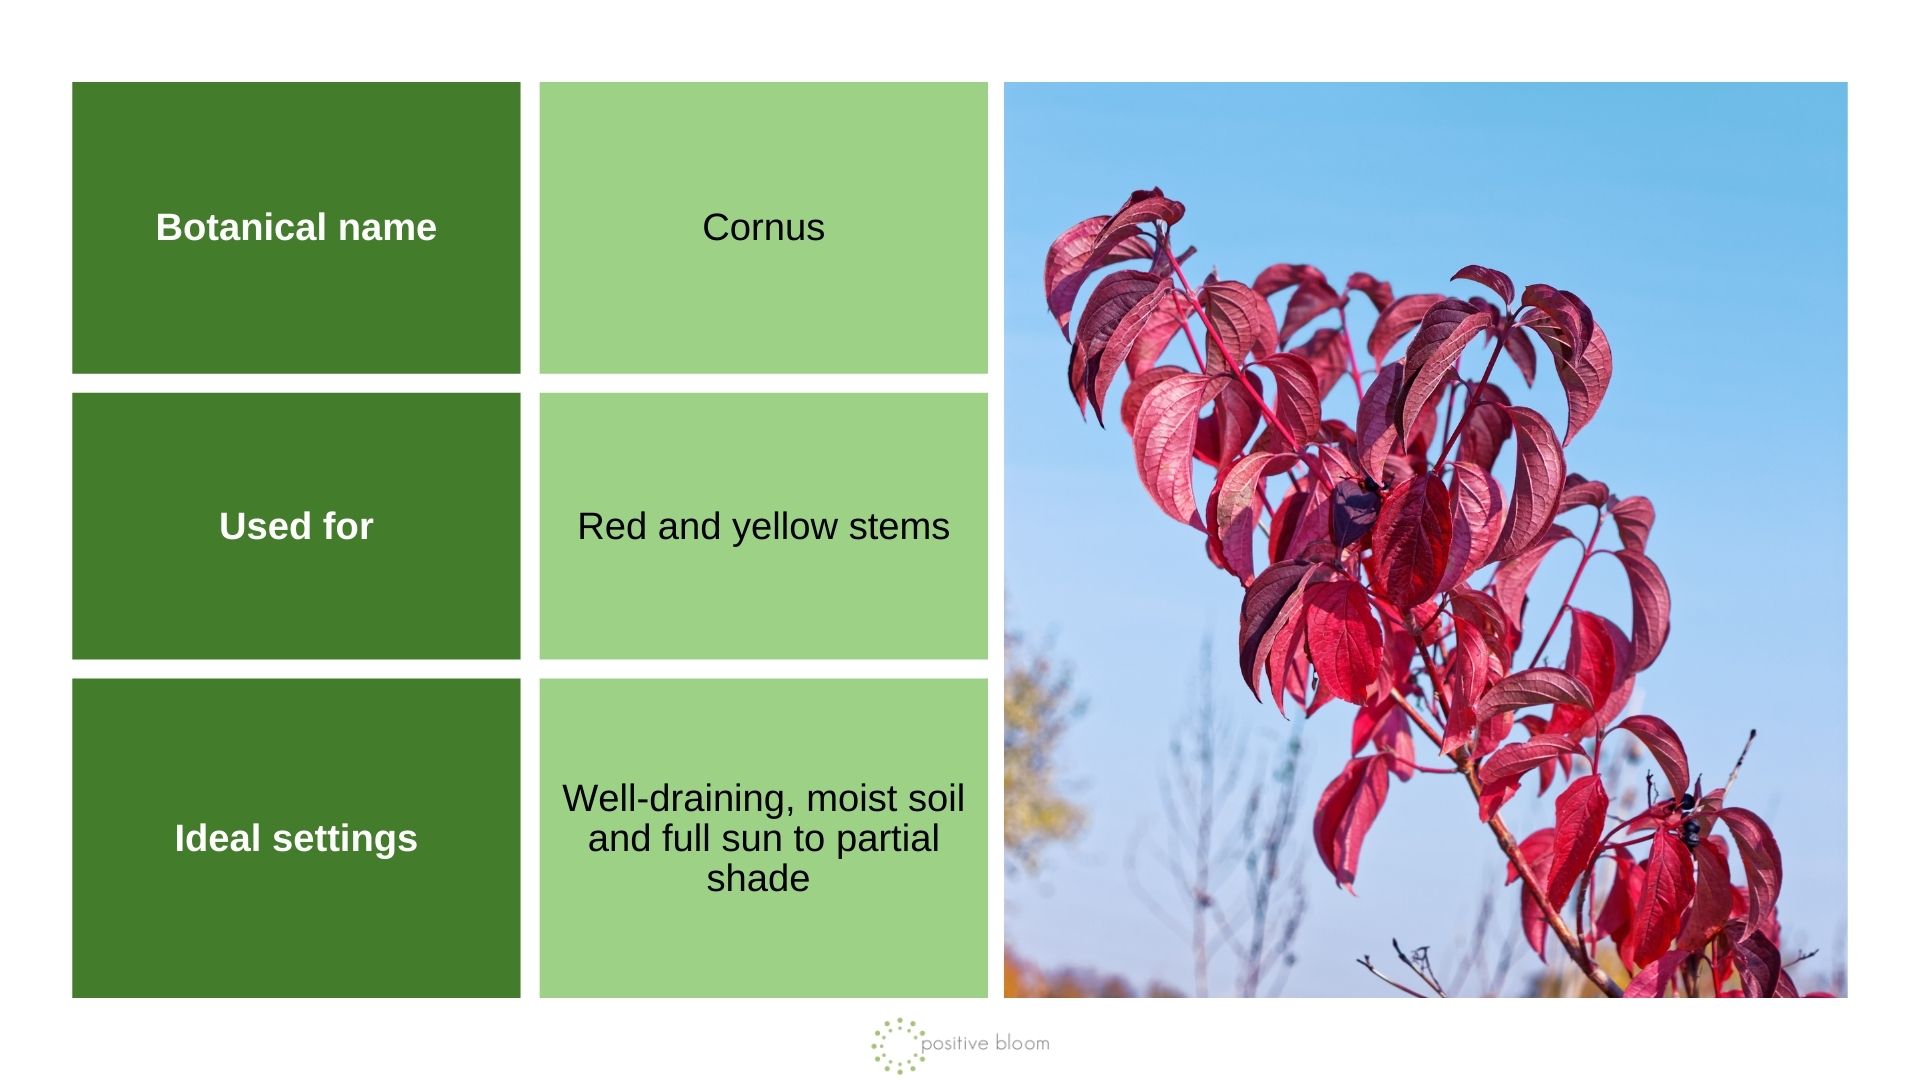 Red Twig Dogwood info chart and photo